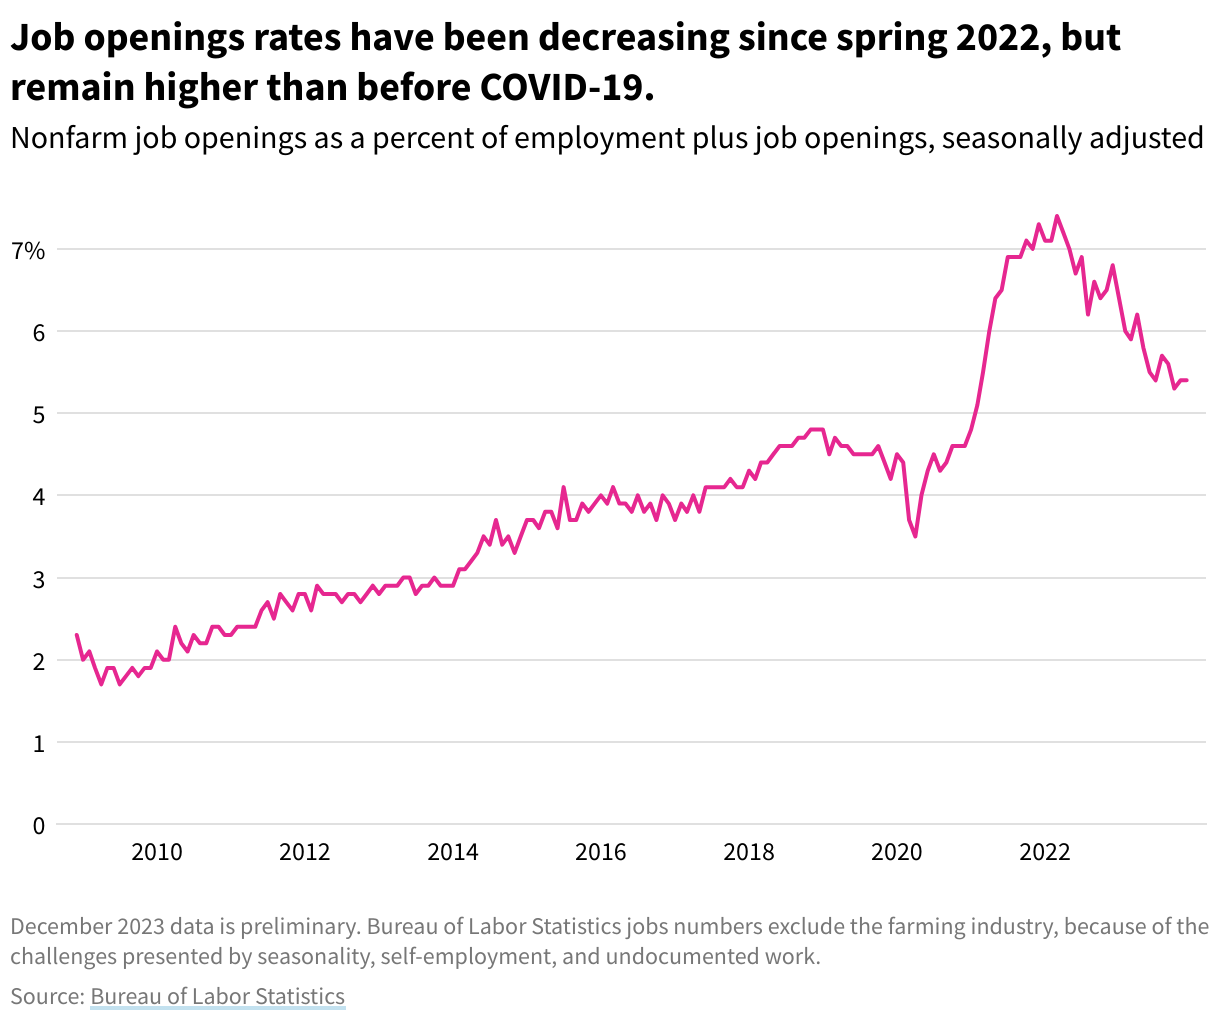 A line chart showing seasonally-adjusted nonfarm job openings as a percent of employment plus job openings. The line peaked in March 2022 and has gradually declined since then.